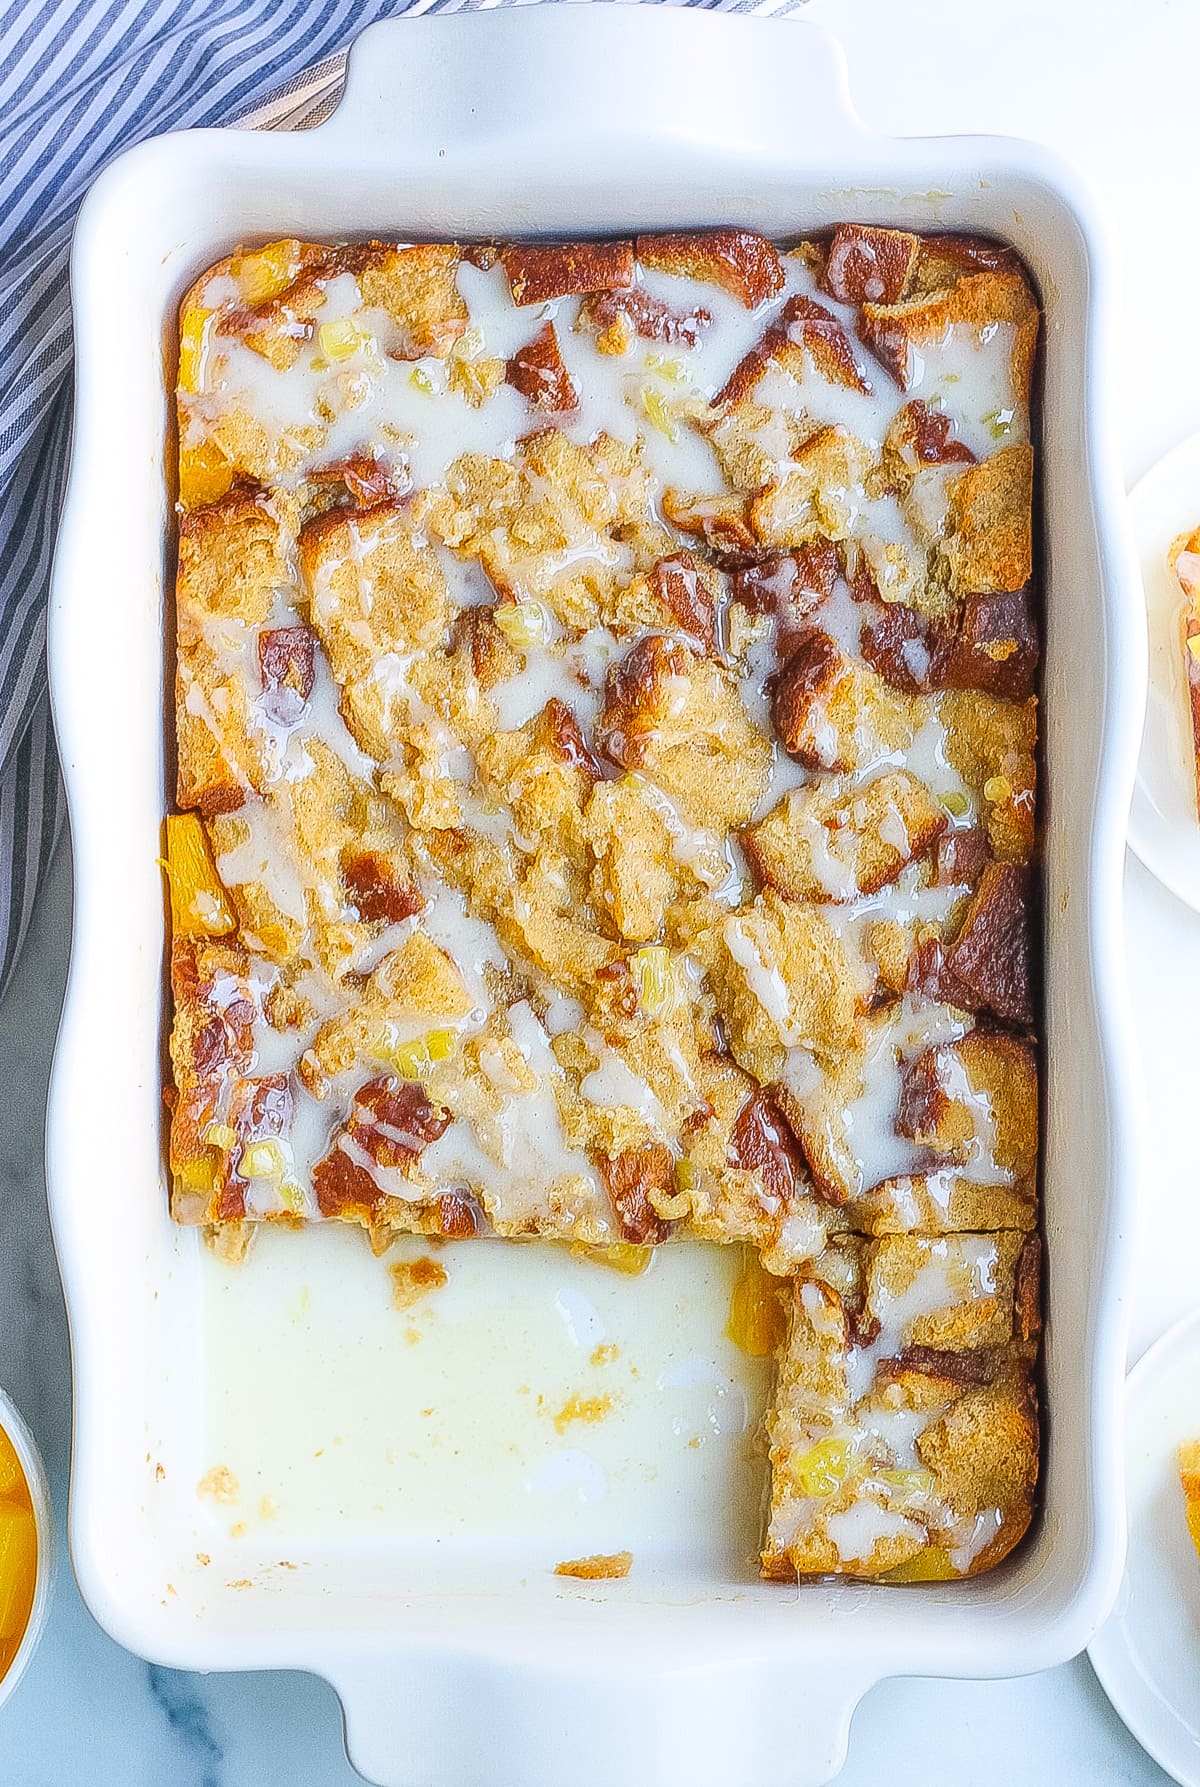 Spiced Pineapple Bread Pudding in dish